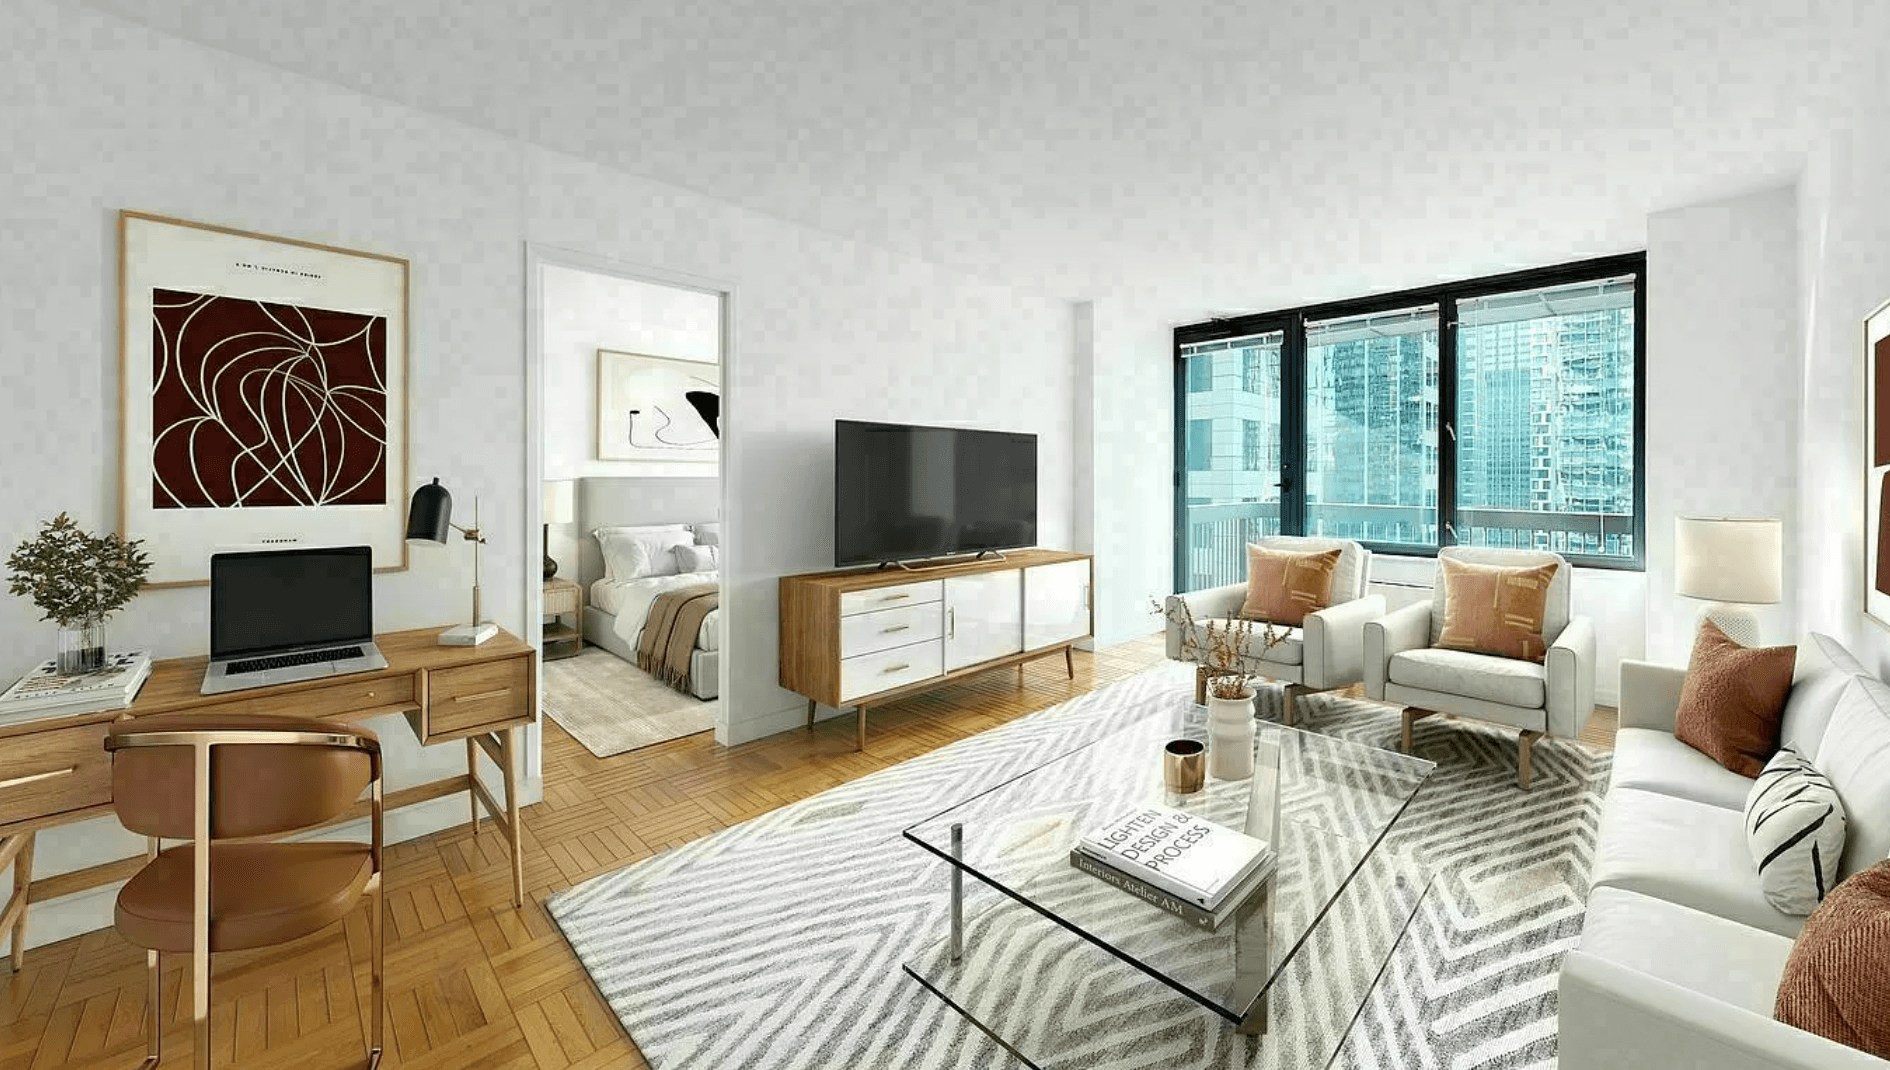 No Fee,Natural Lights Floods this Art-Deco Building in Midtown, 1Bd/1Ba with Balcony